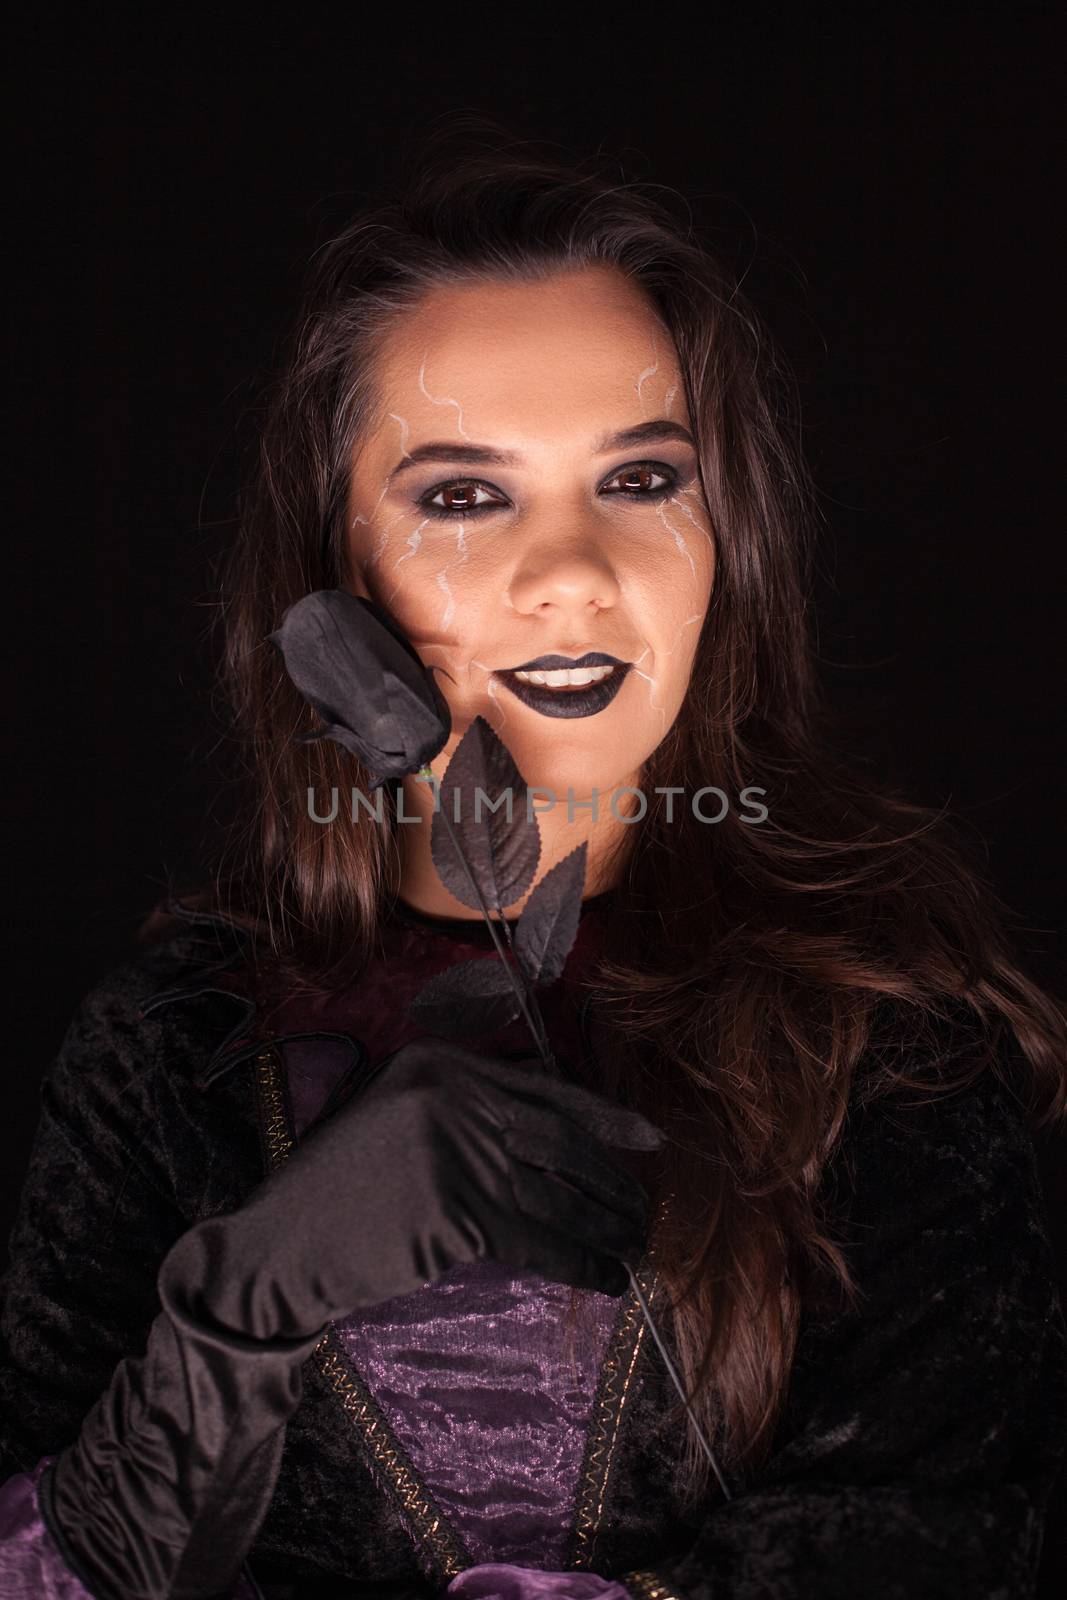 Witch with an evil face over black background . Halloween costume.